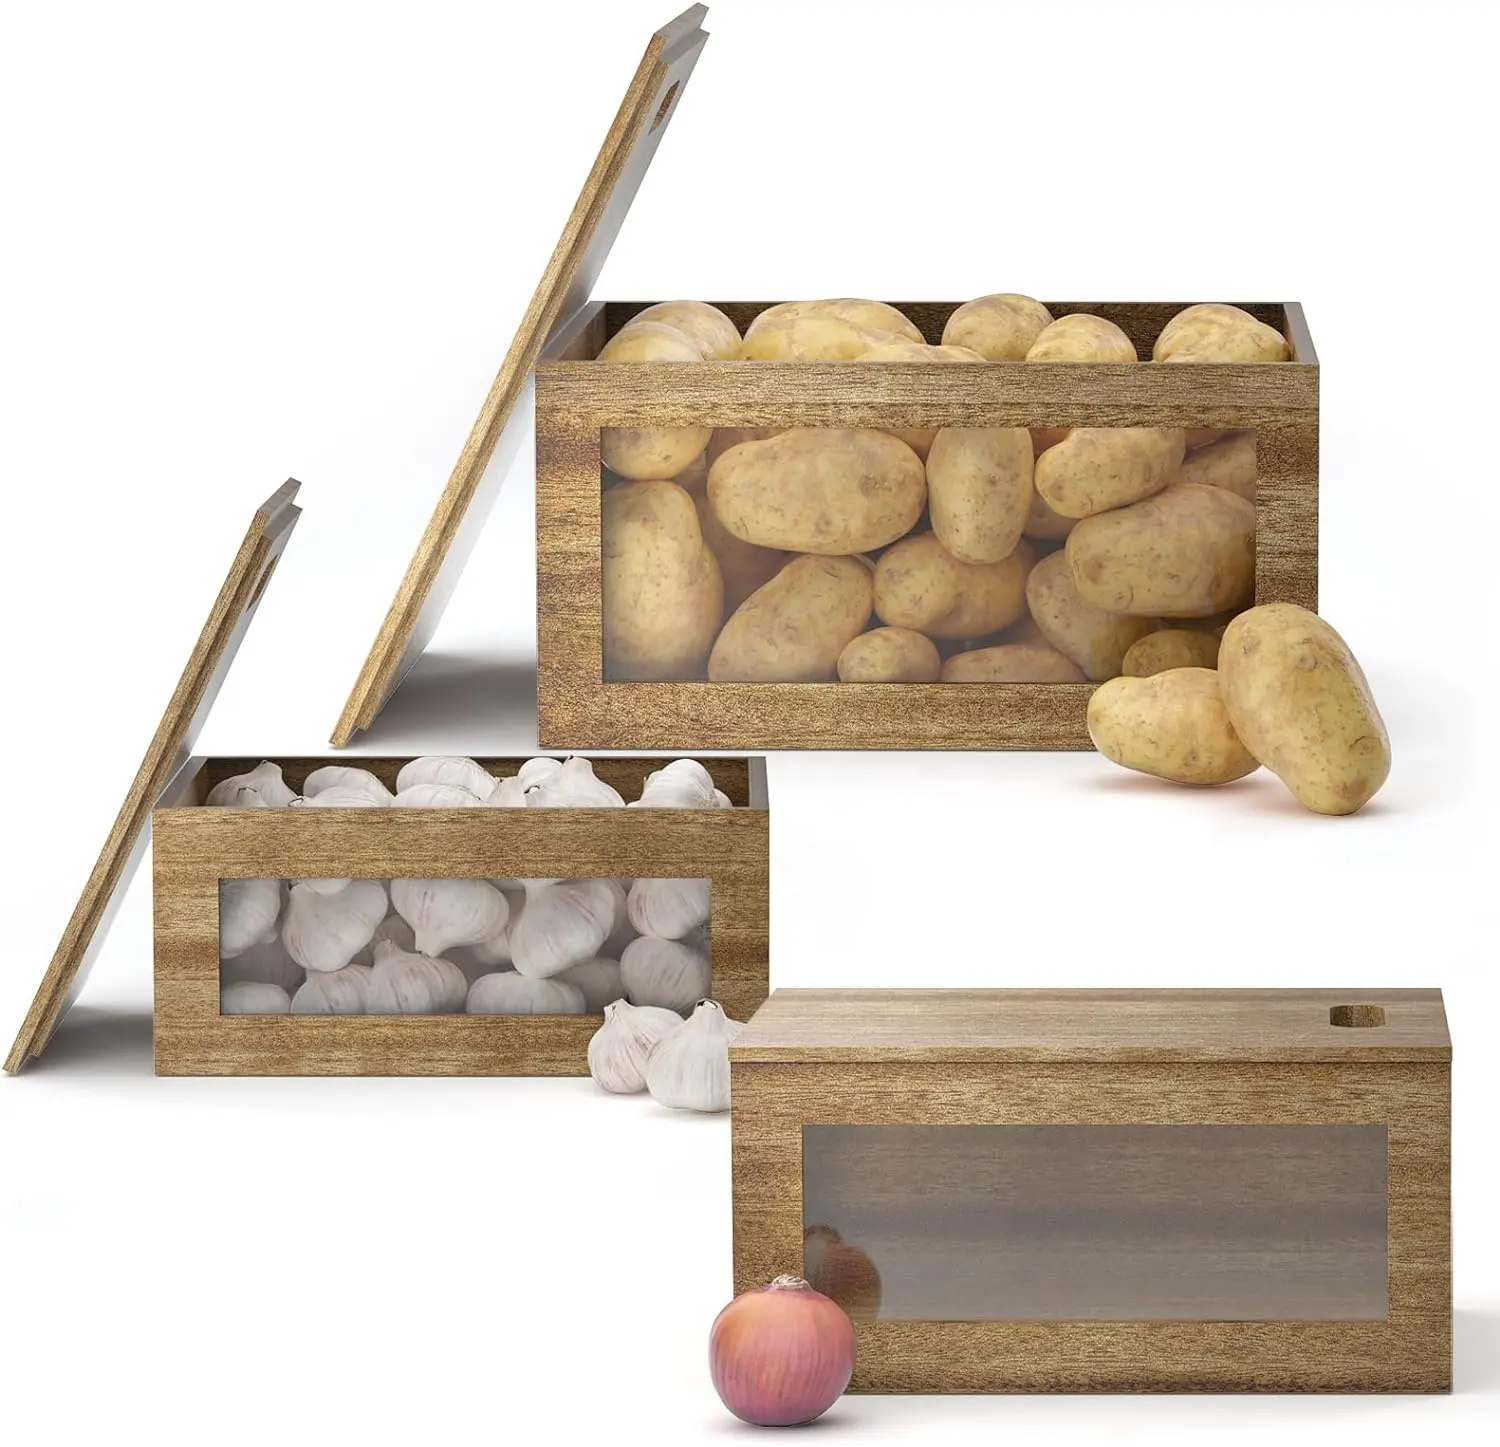 Acacia wooden storage vegetable containers window container for kitchen counter or pantry stackable potato&onion&garlic keeper